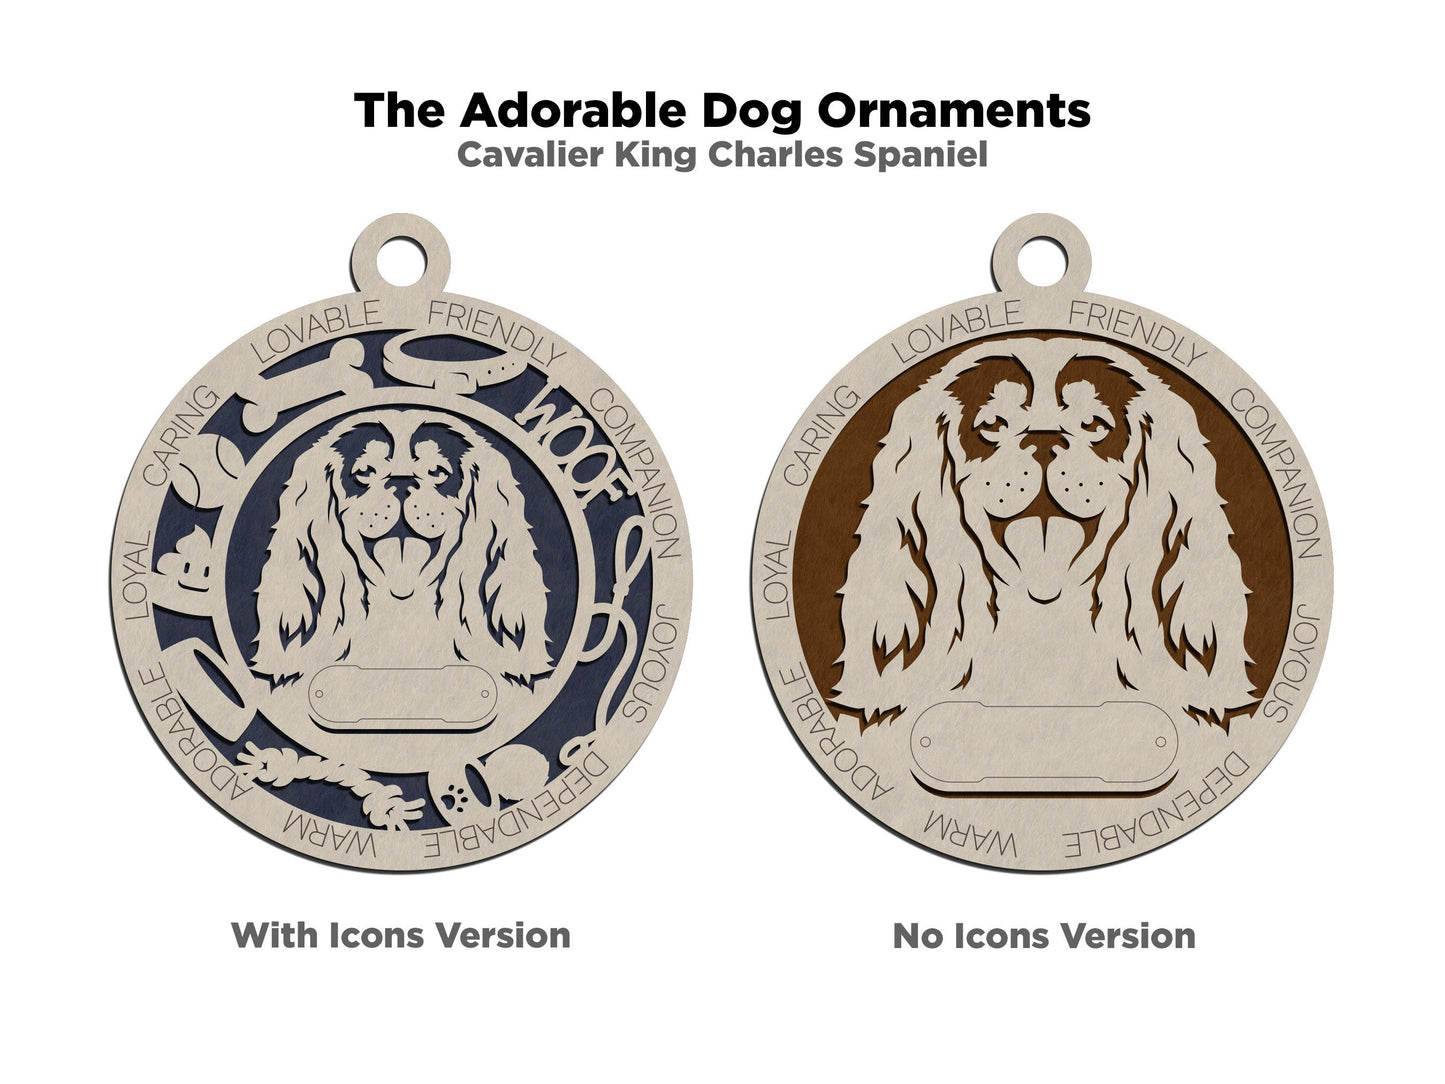 Cavalier King Charles Spaniel - Adorable Dog Ornaments - 2 Ornaments included - SVG, PDF, AI File Download - Sized for Glowforge